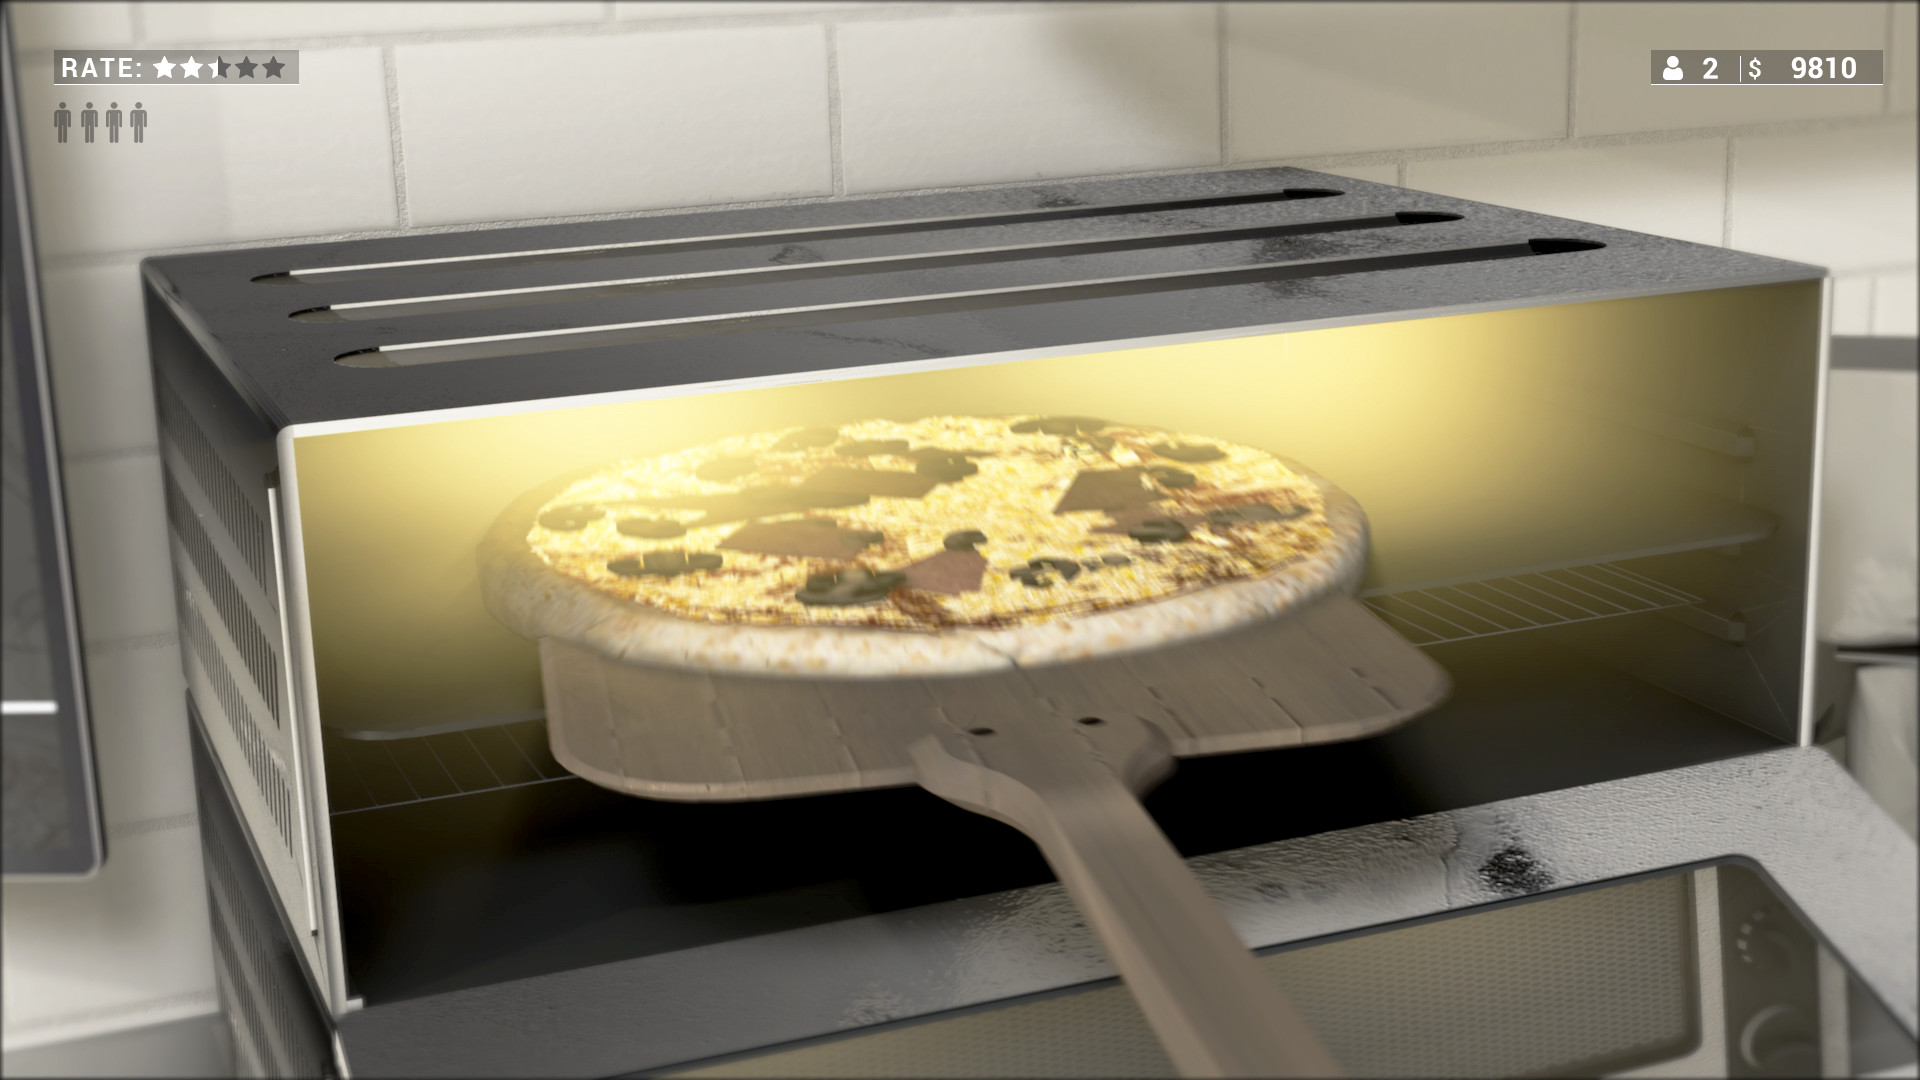 Preheat those stoves as Pizza Simulator is getting served up on PC